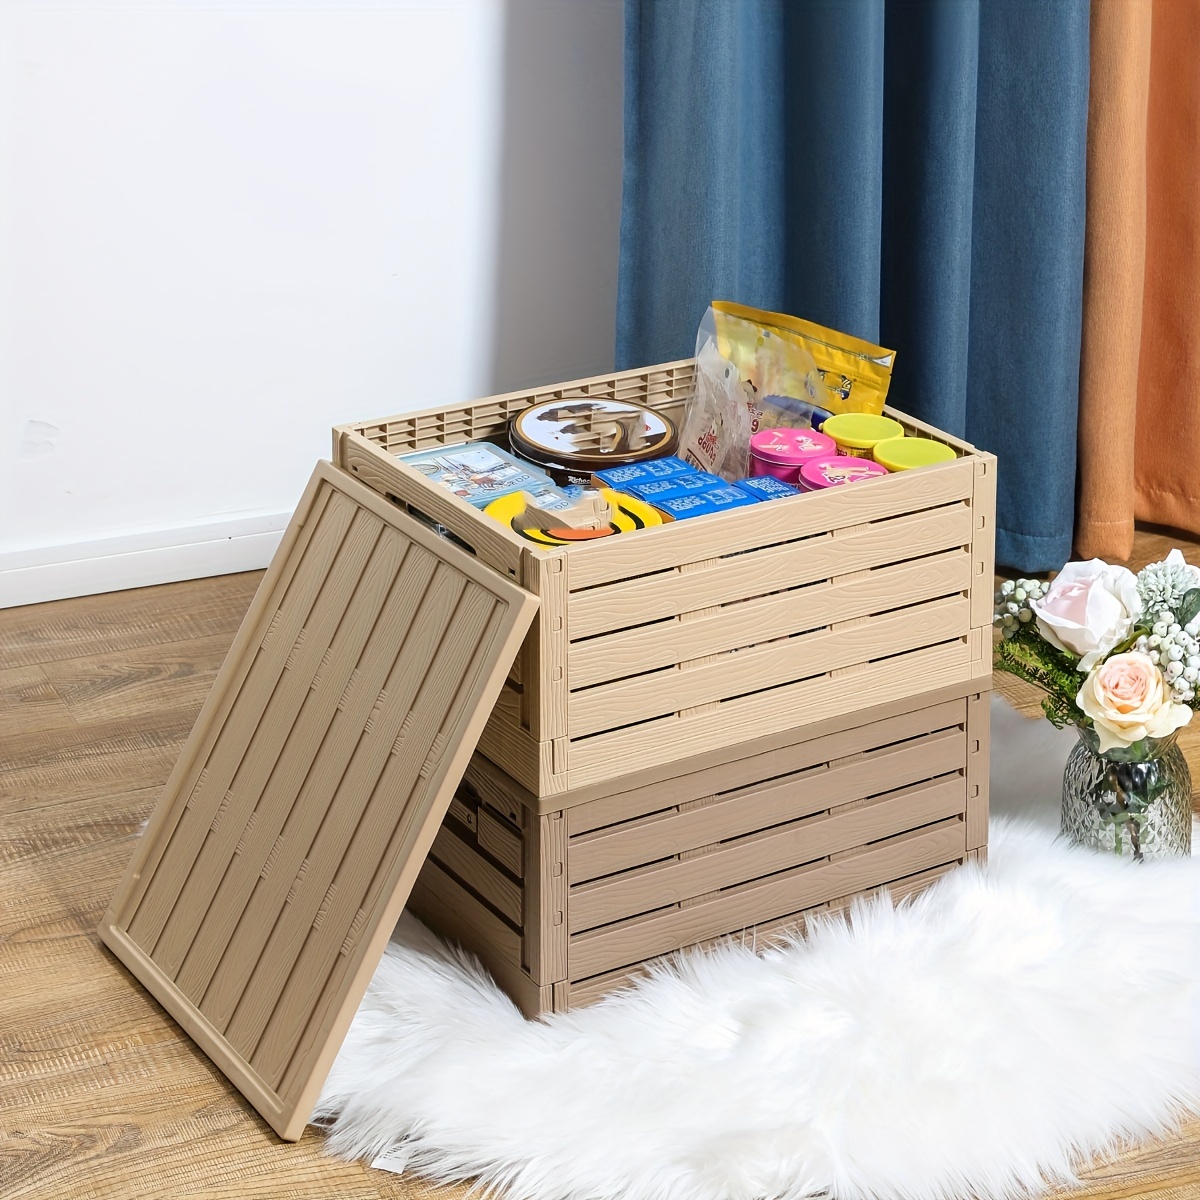 Extra large thickened storage box, household plastic storage box, dormitory  clothing storage box, toy sorting and turnover box